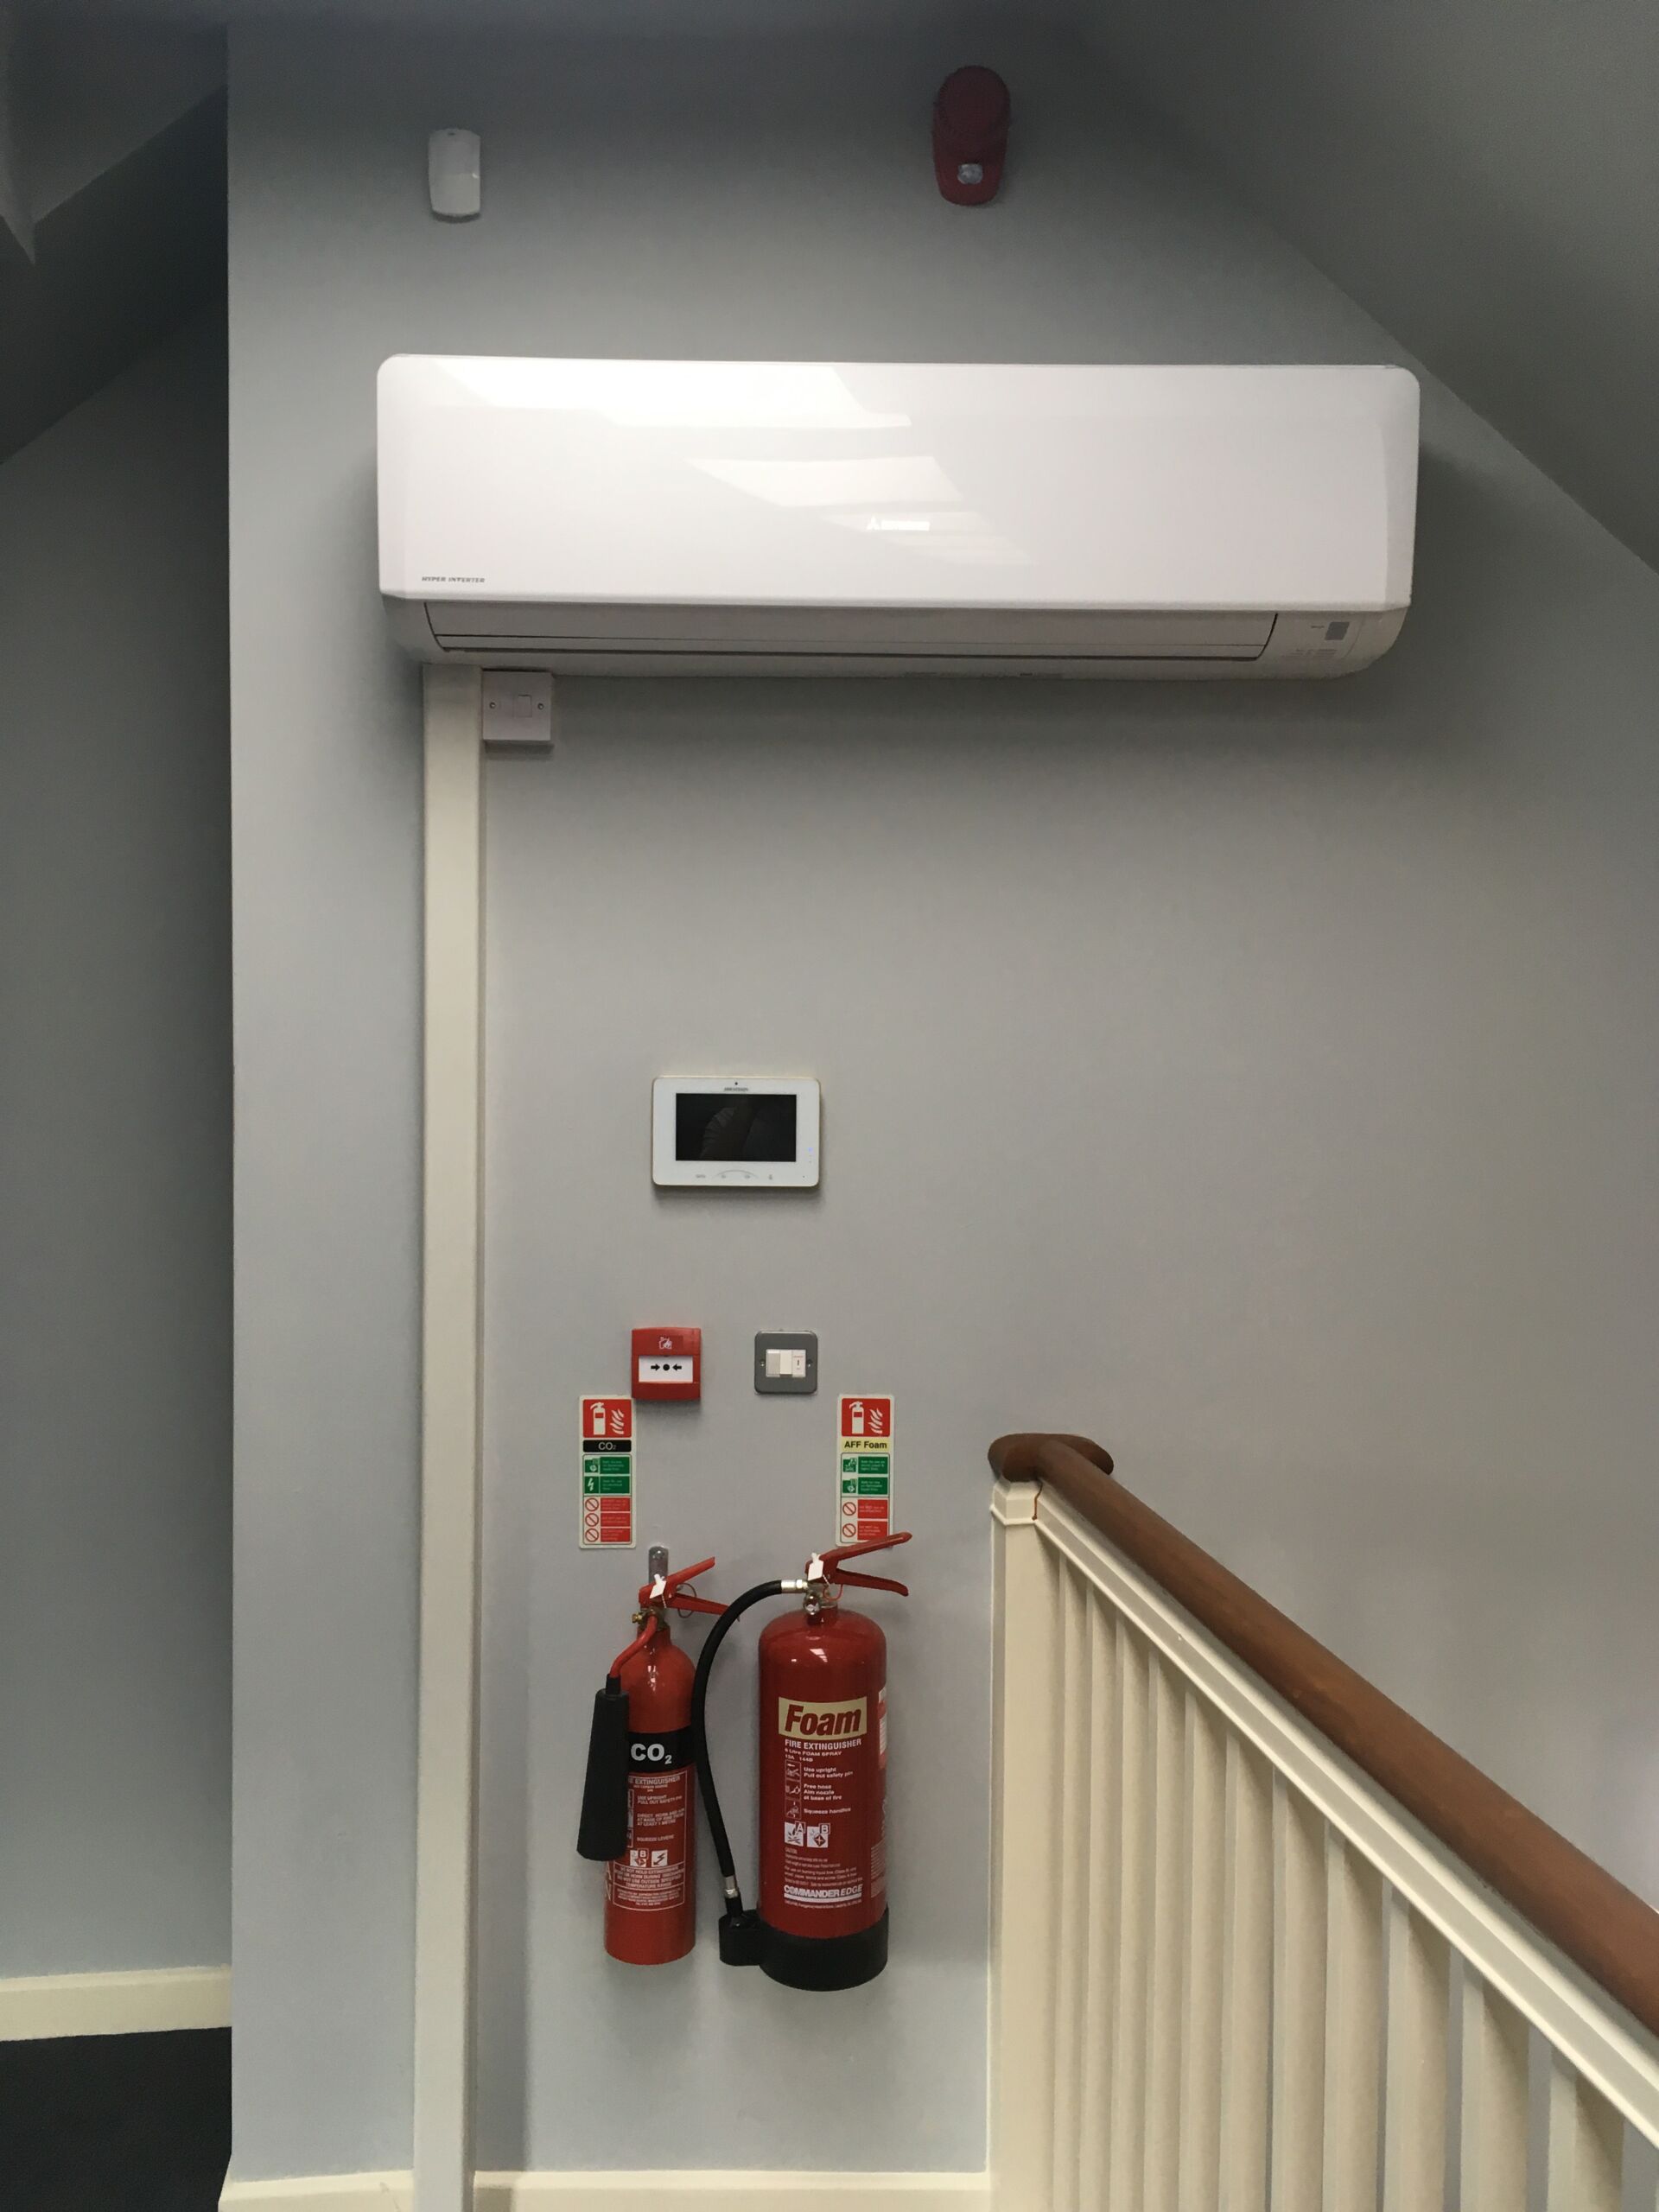 Air conditioning unit installed on a wall in a corridor